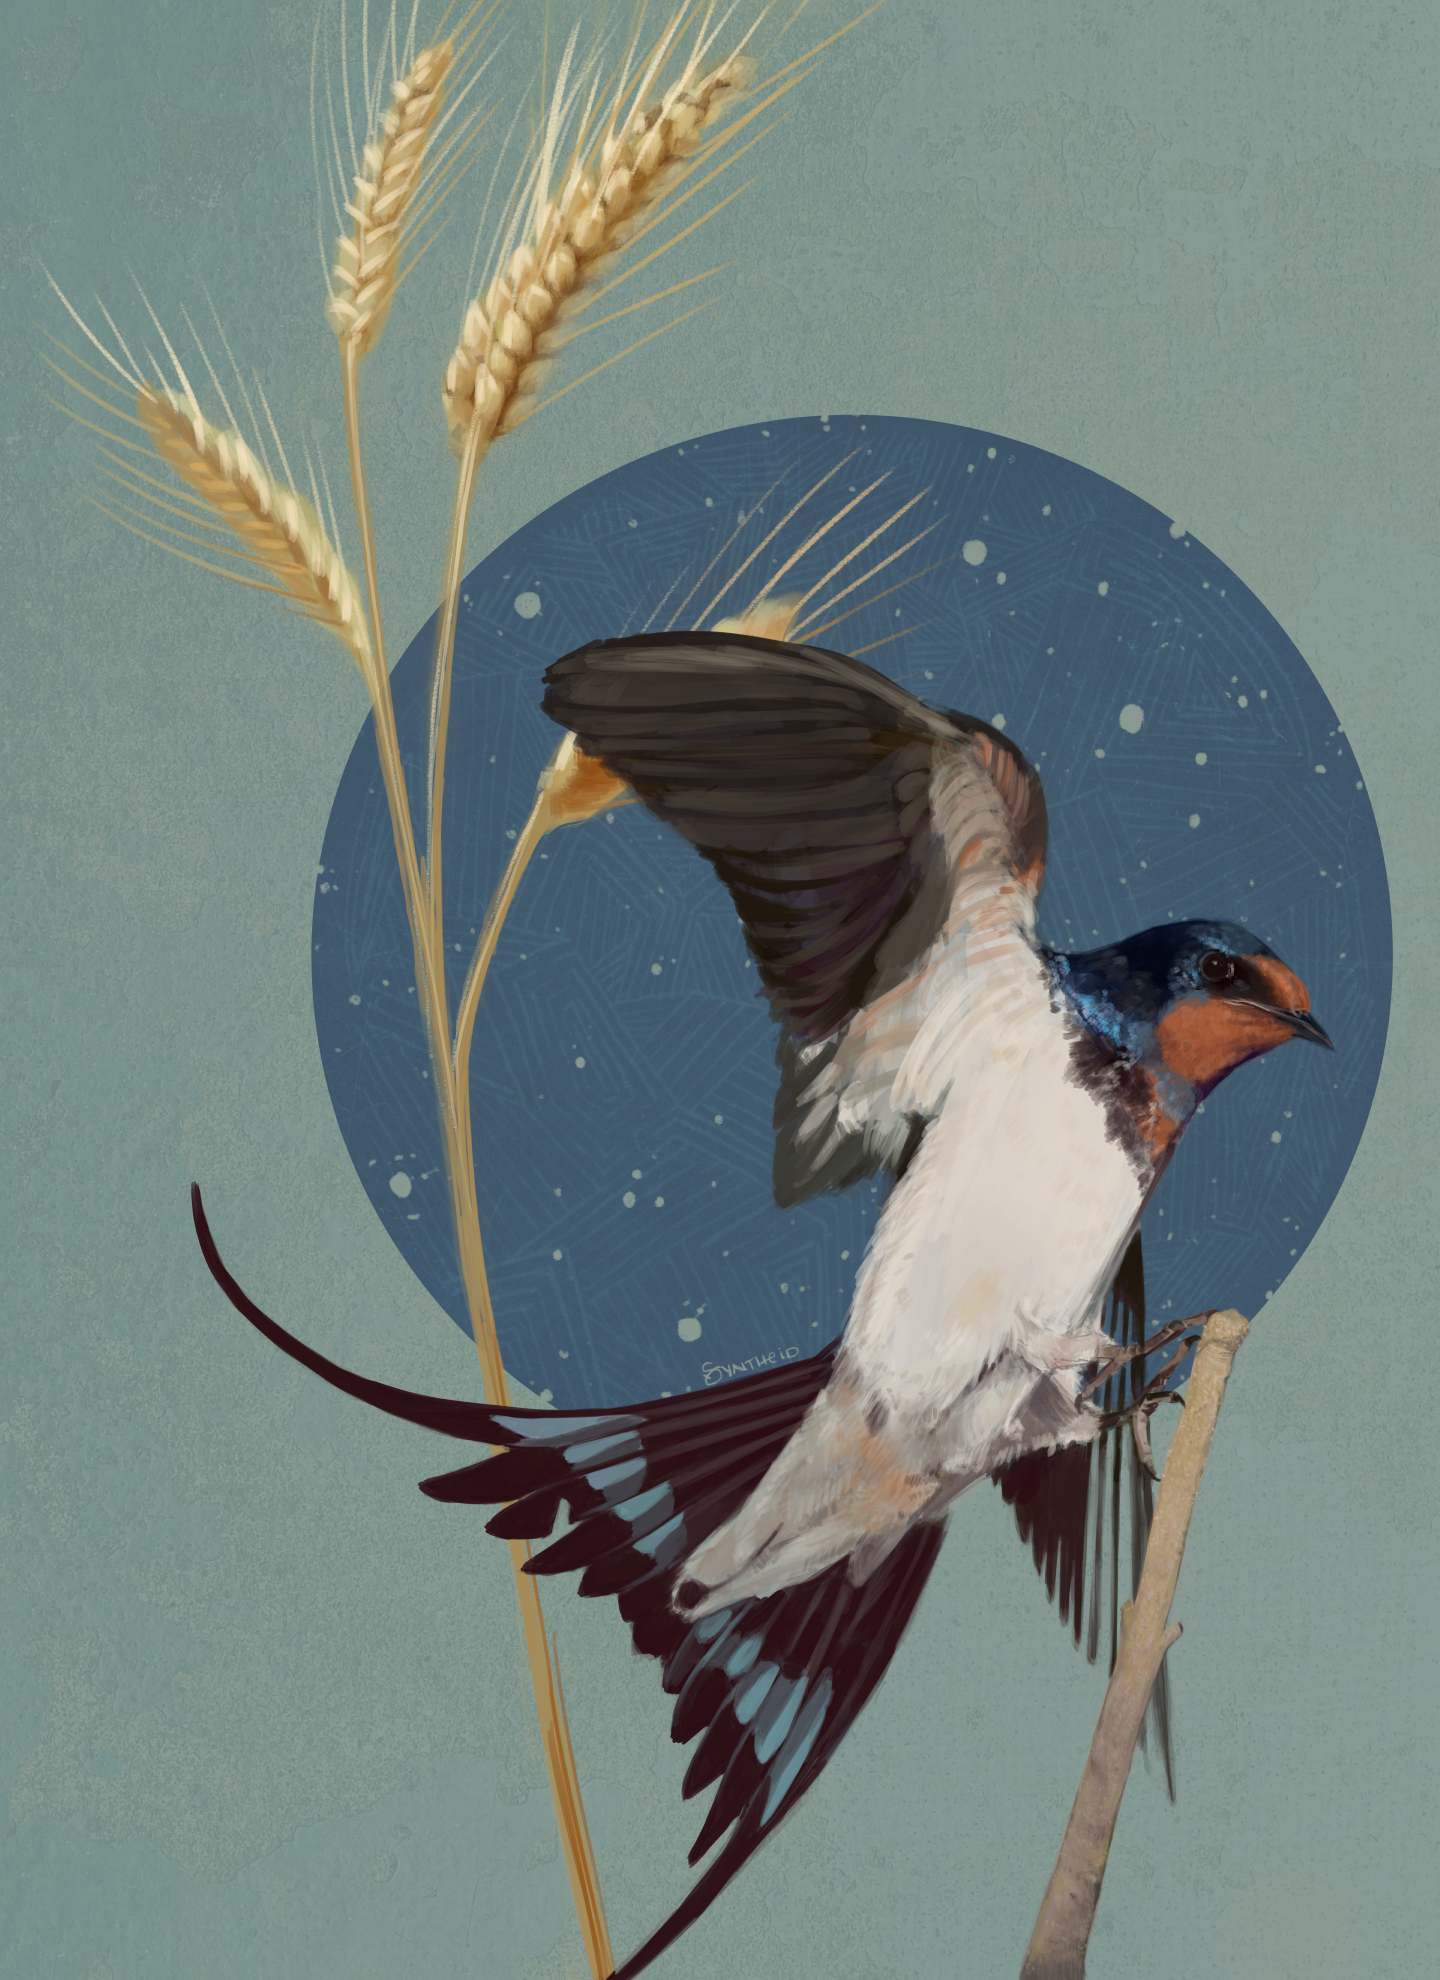 barn swallow with graphic impression of stars and wheat behind it